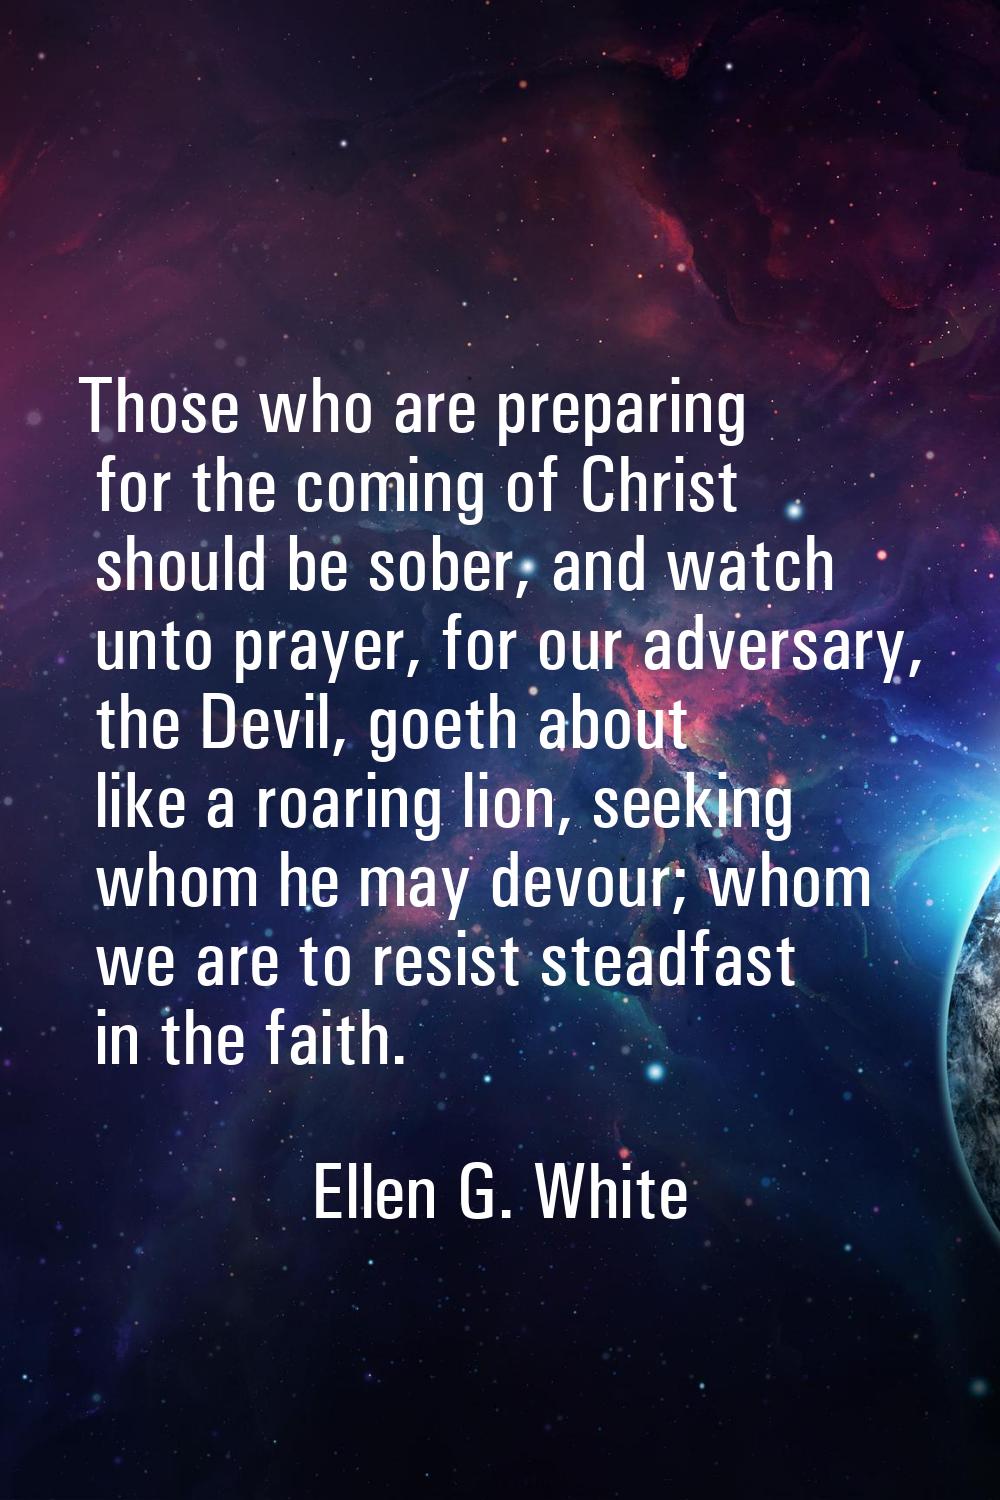 Those who are preparing for the coming of Christ should be sober, and watch unto prayer, for our ad